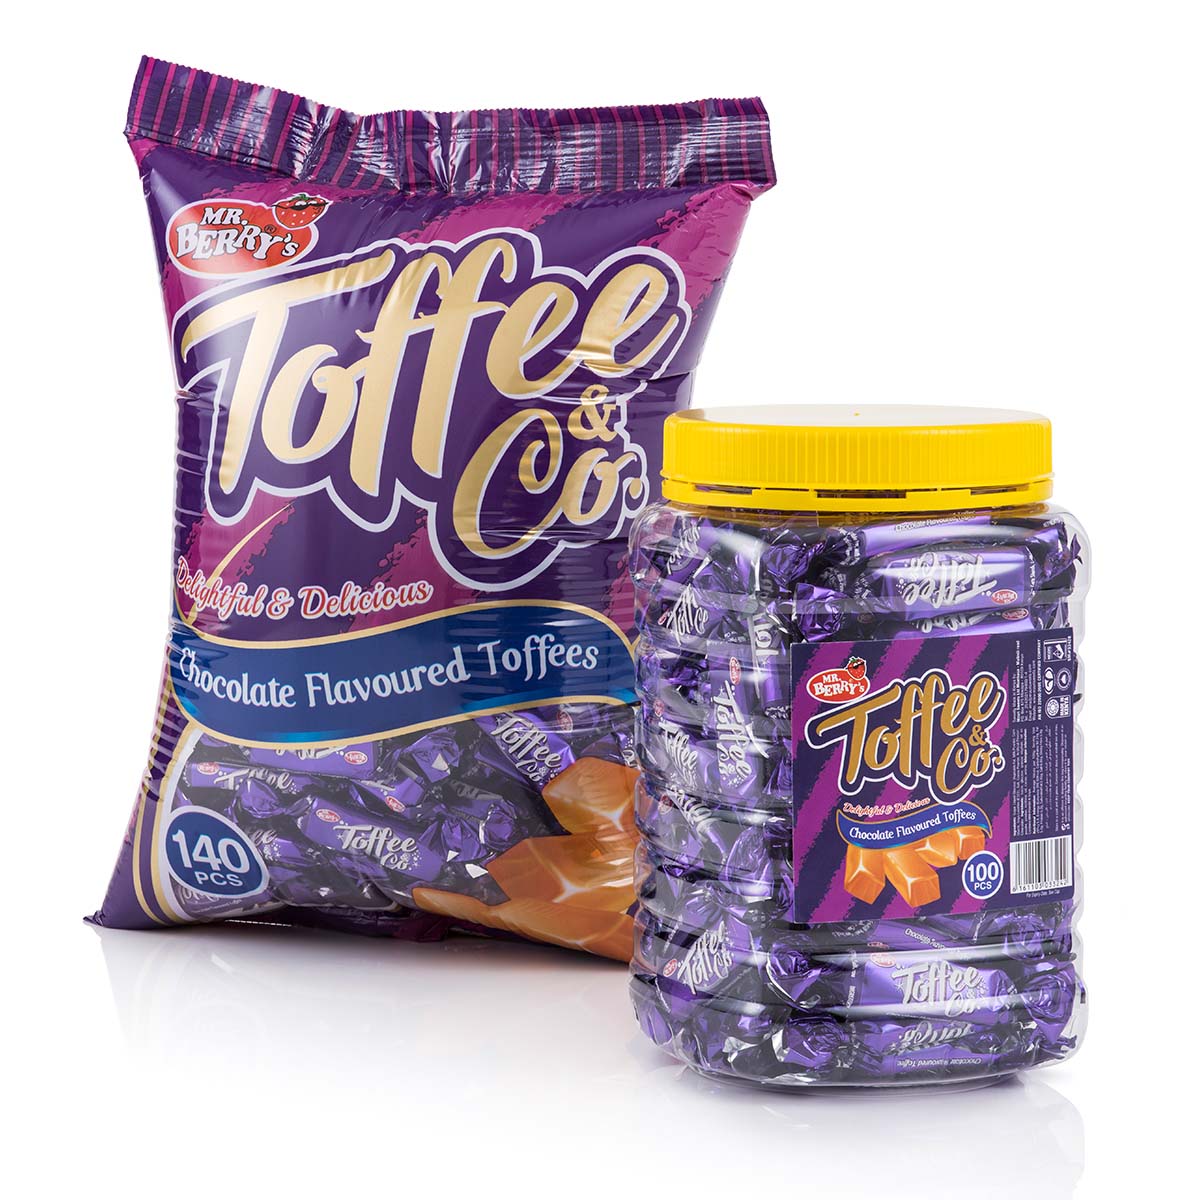 TOFFEE & CO. Chocolate Flavour (140 Pieces) x 12